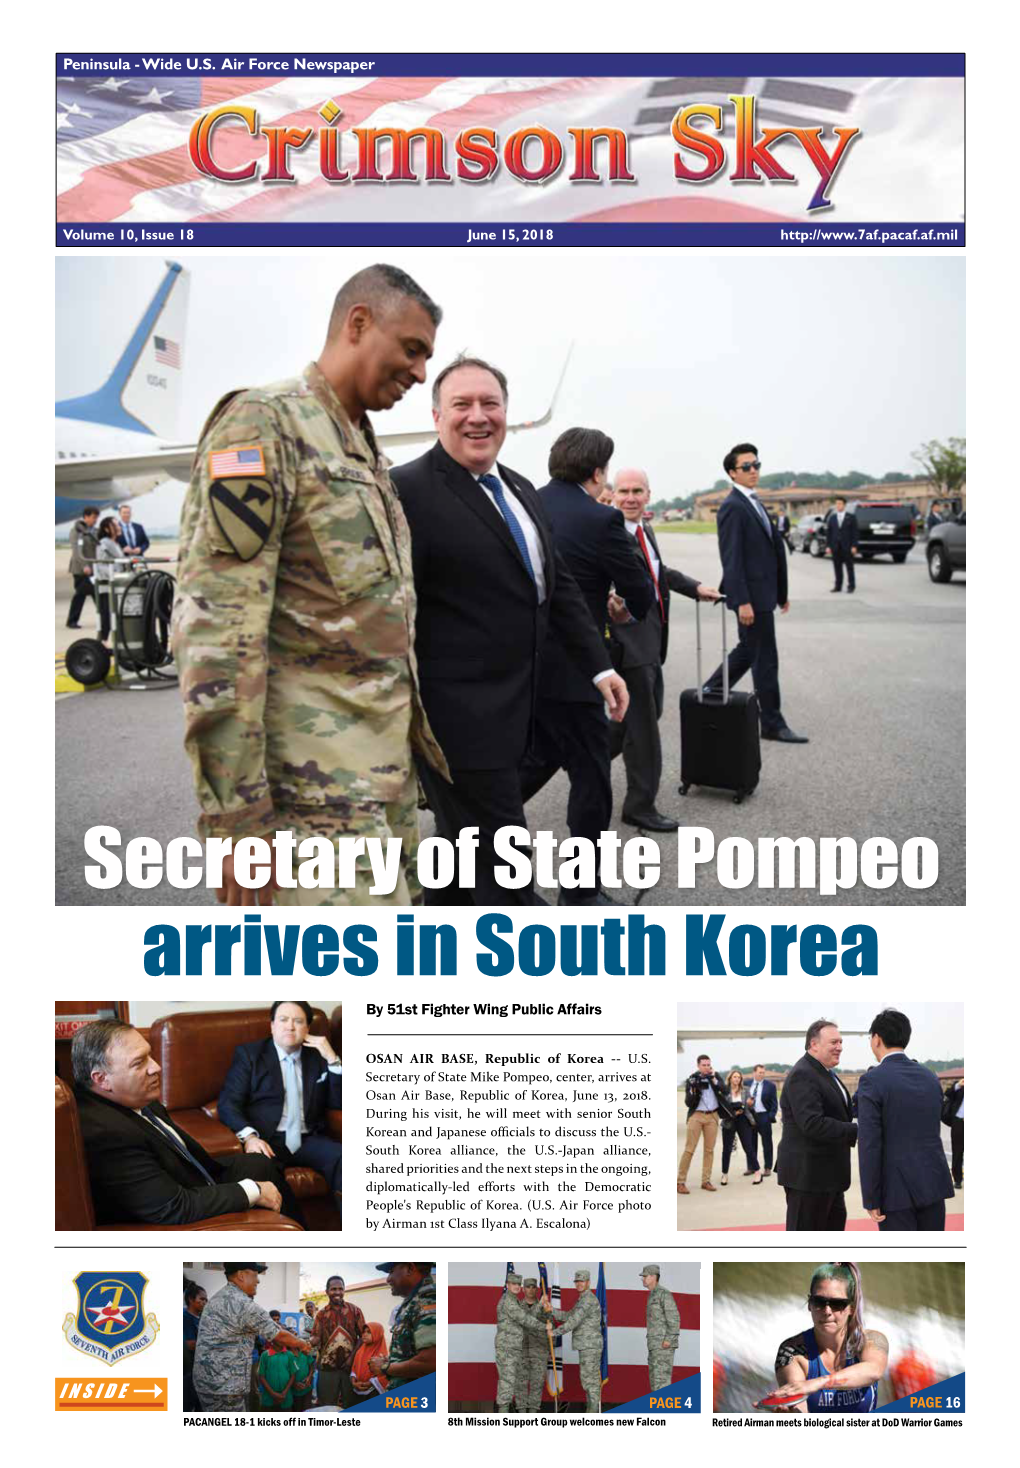 Arrives in South Korea Secretary of State Pompeo